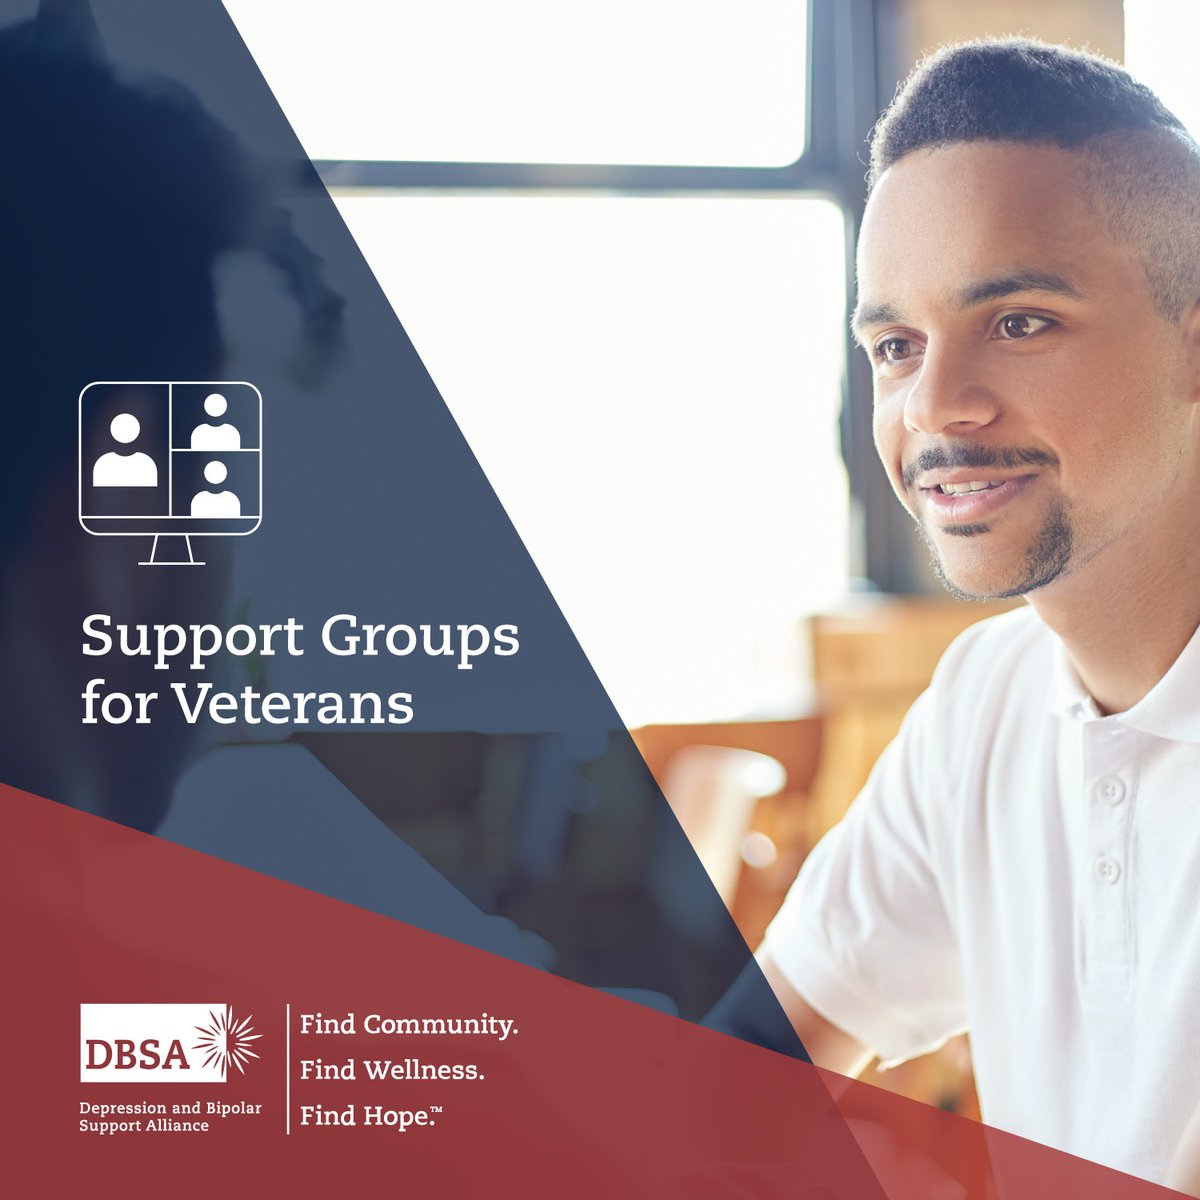 Find support from others living with depression or bipolar disorder in one of DBSA’s online or in-person Veteran support groups. These groups offer participants the chance to discuss shared experiences and find community with others walking a similar path. bit.ly/3vrJUbq